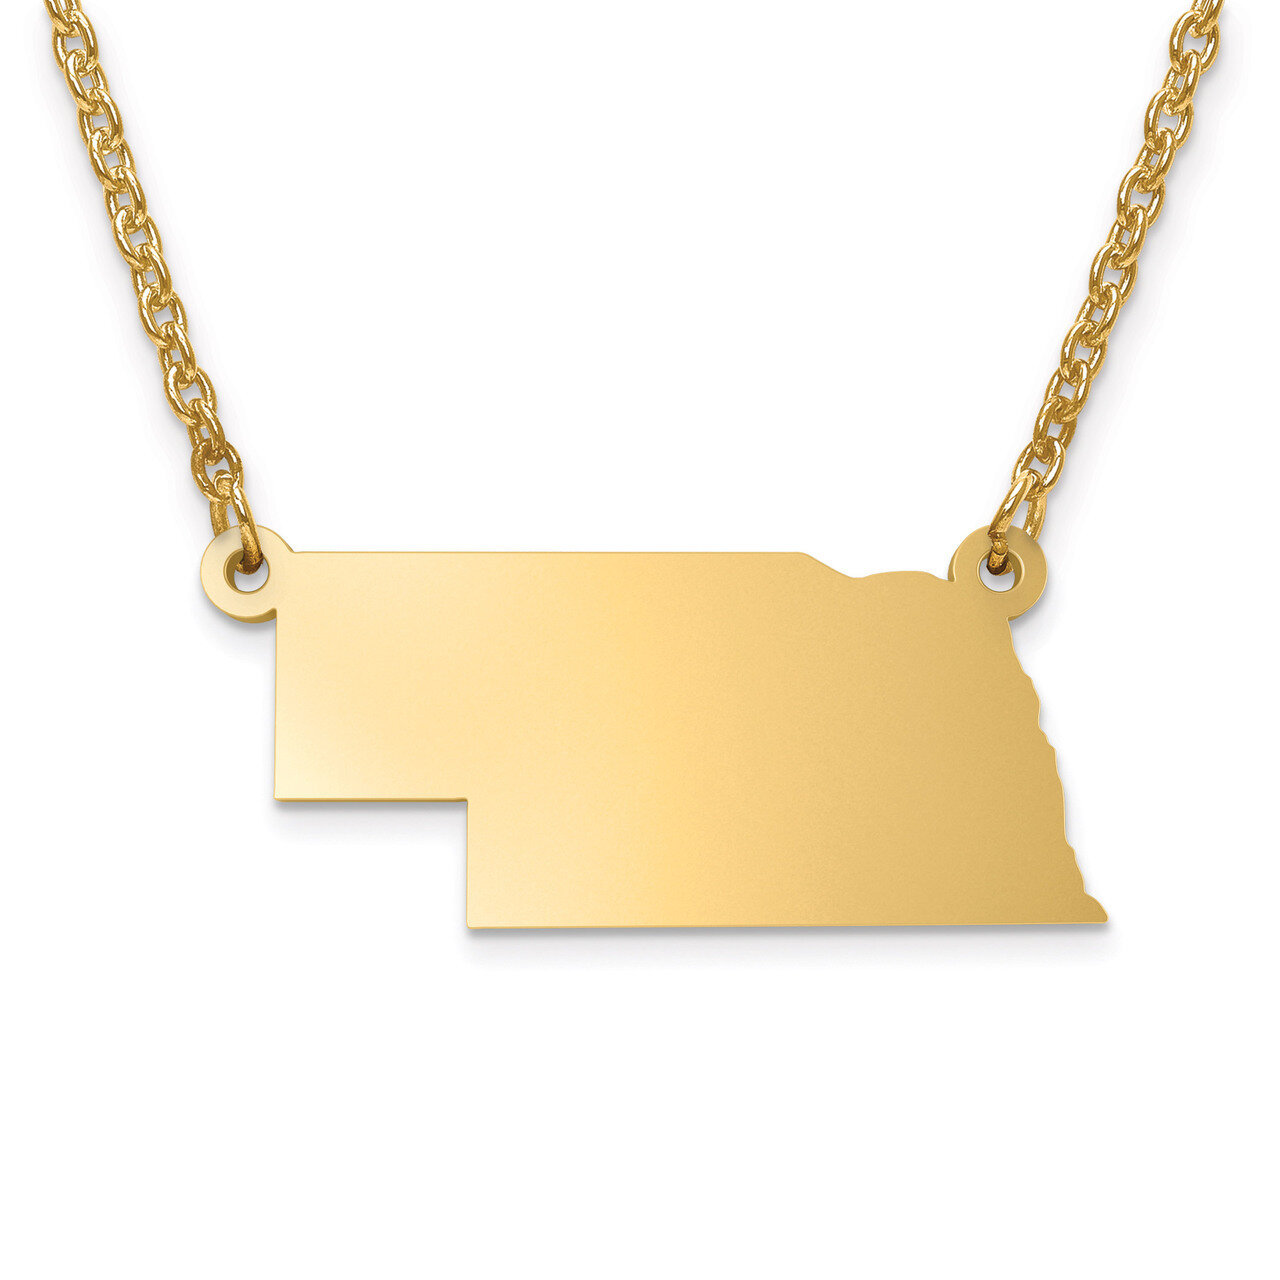 Nebraska State Pendant with Chain Engravable Gold-plated on Sterling Silver